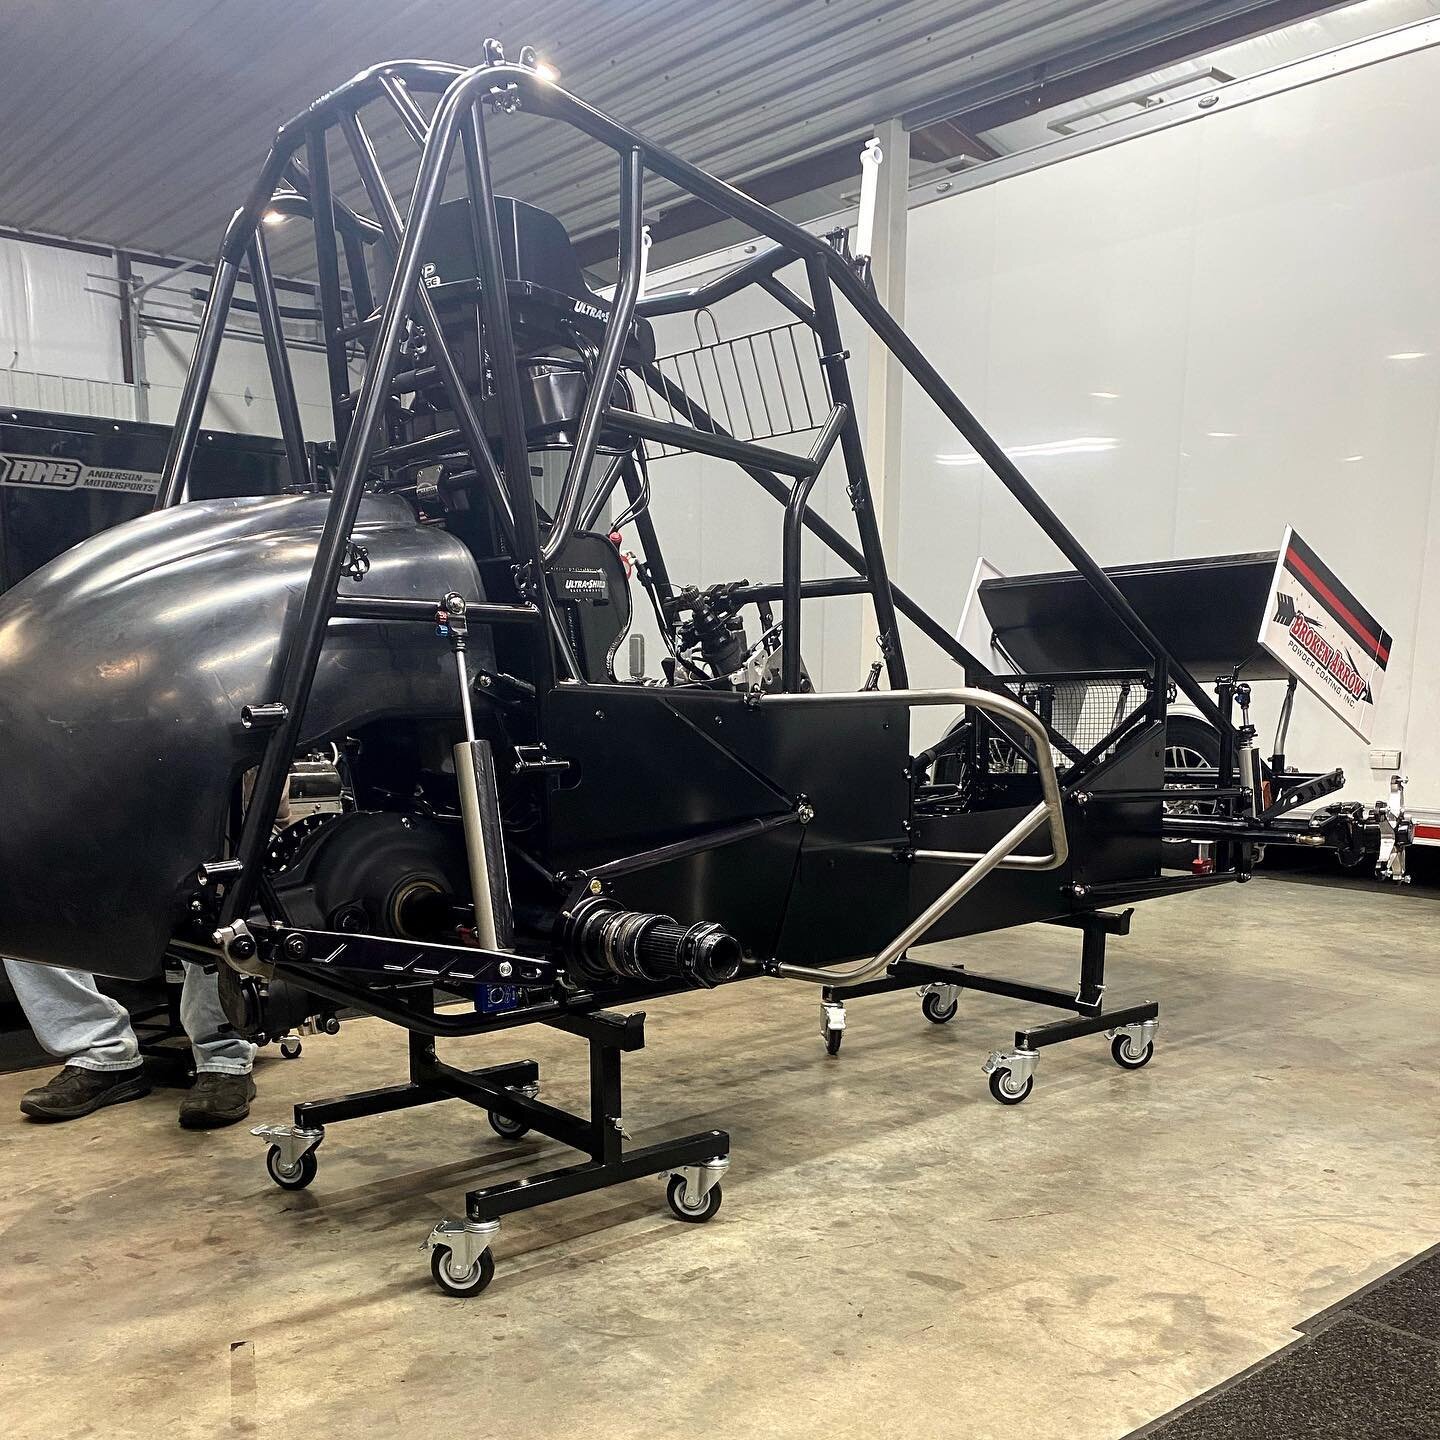 In exactly one month from today we will be in Texas kicking off our 2022 season with the @lucasoilascs National Series at Devils Bowl Speedway! 

In the mean time we are busy at the shop getting our All-Pro Auto Reconditioning #55B ready.

Thank you 